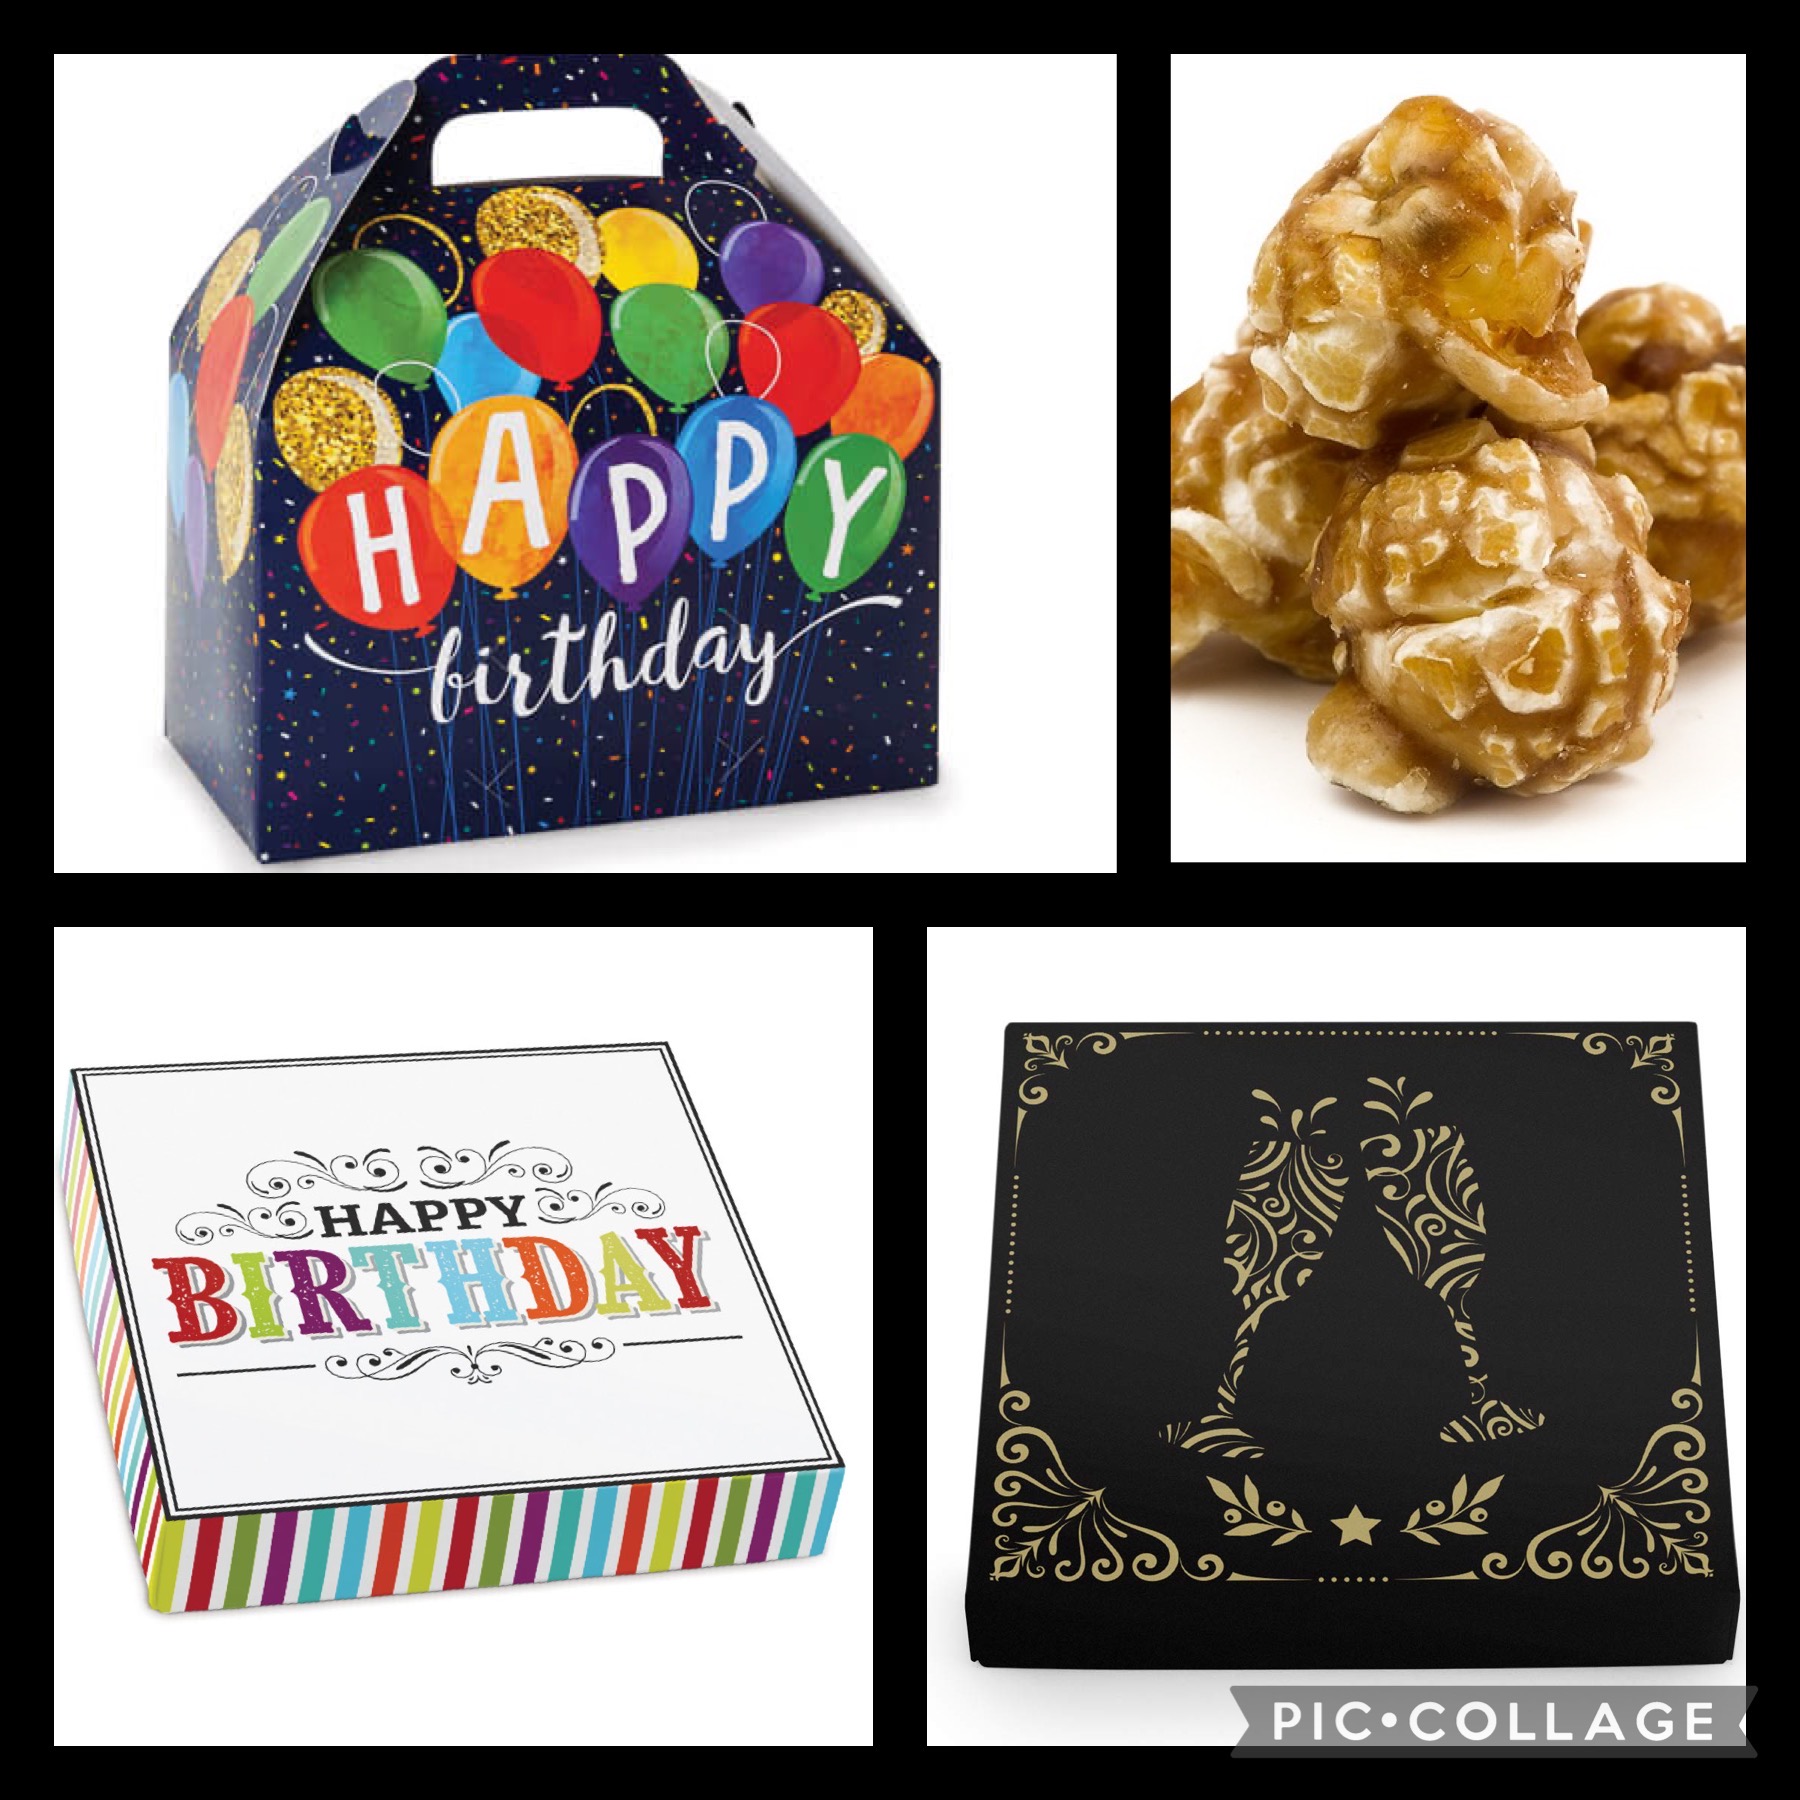 Deluxe Happy Birthday Large Gift Box Sugar Free